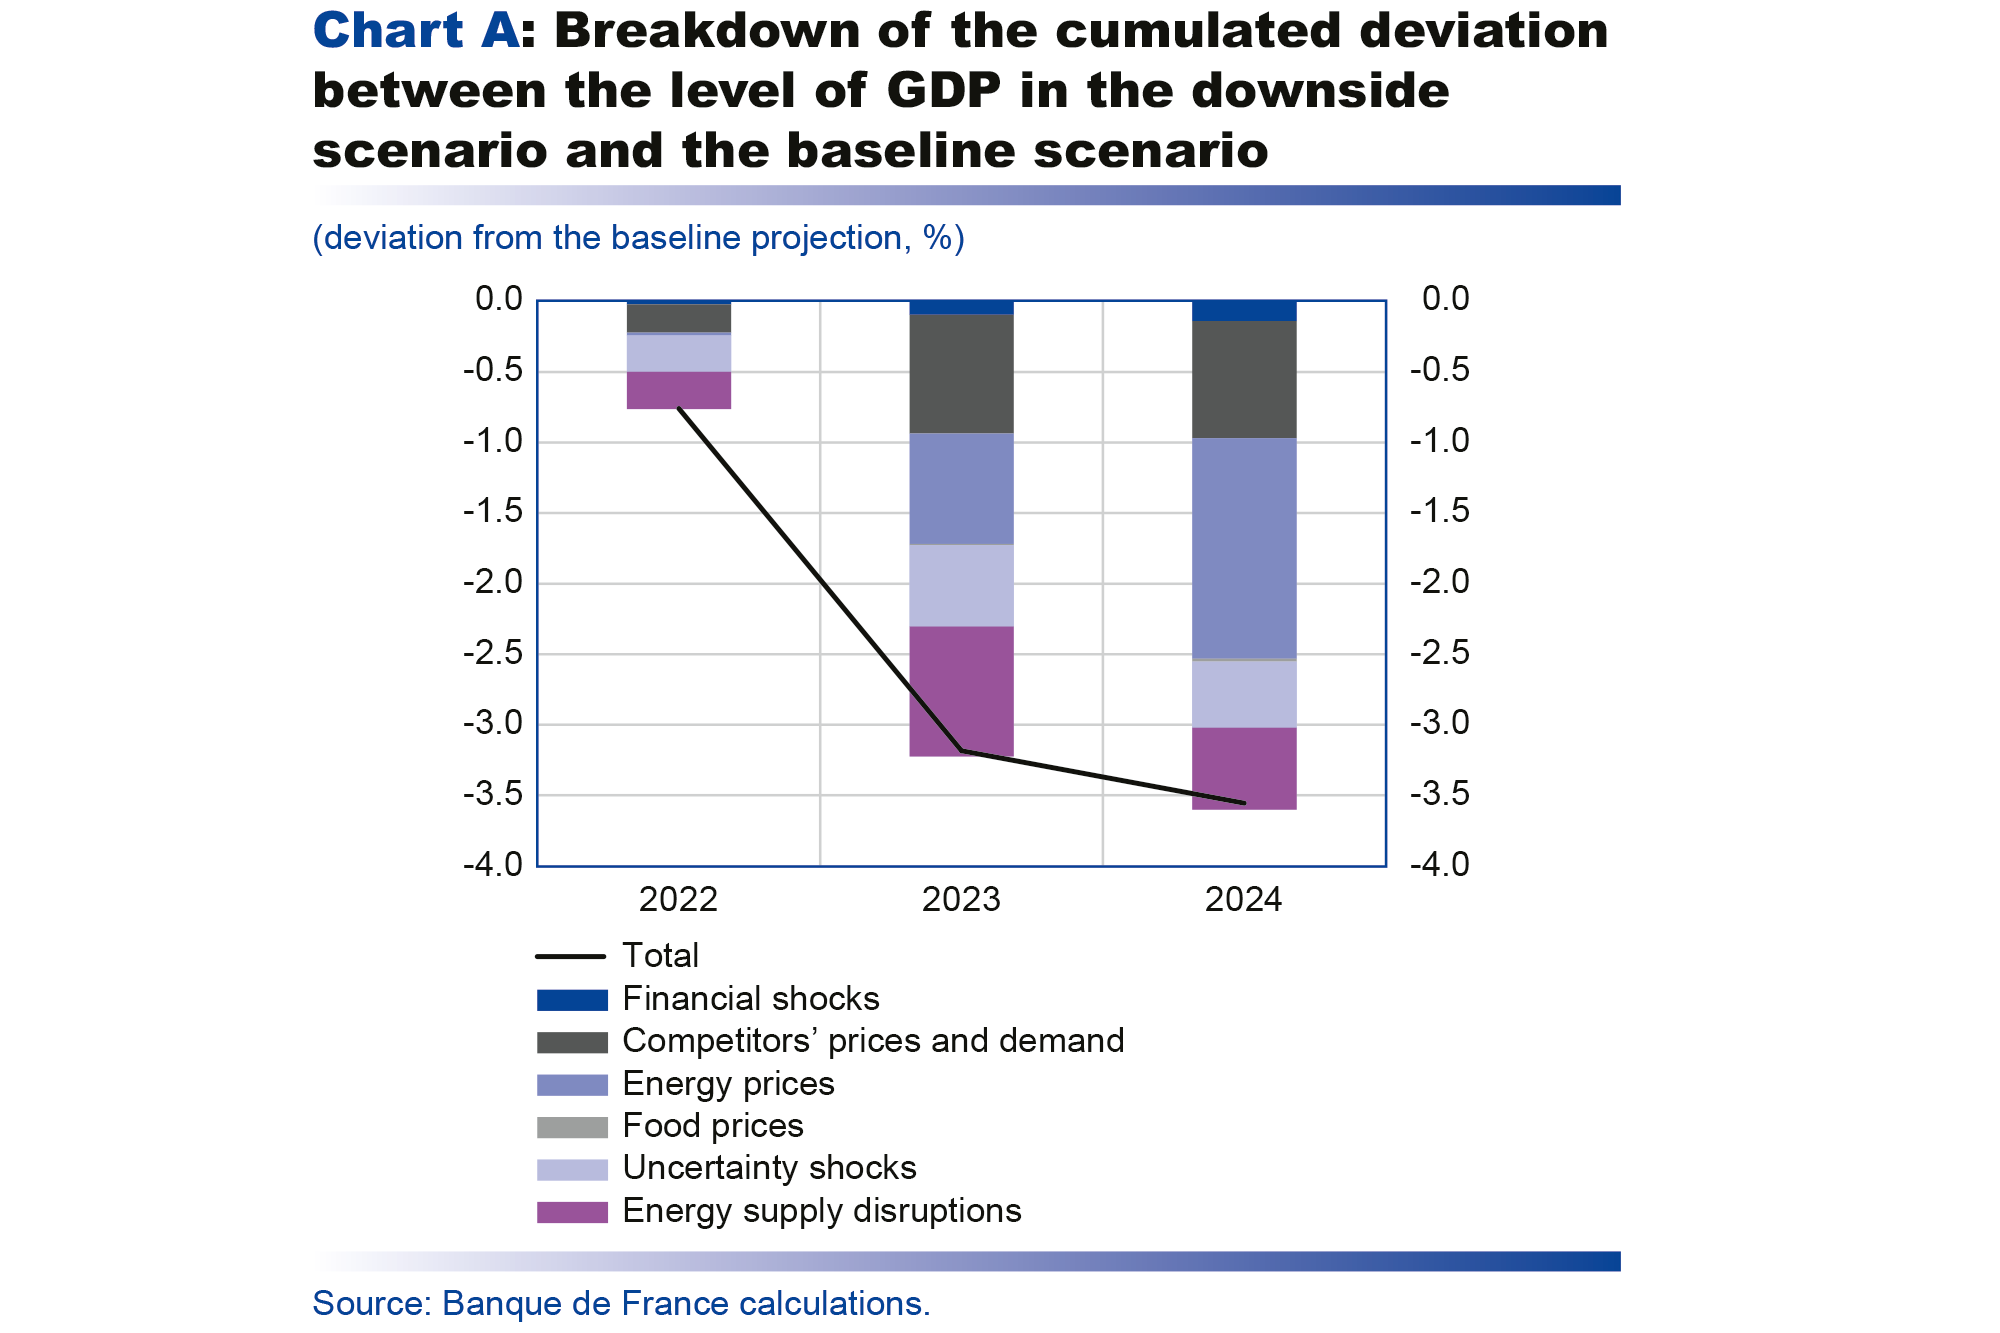 Macroeconomic projections – June 2022 - Breakdown of the cumulated deviation between the level of GDP in the downside scenario and the baseline scenario